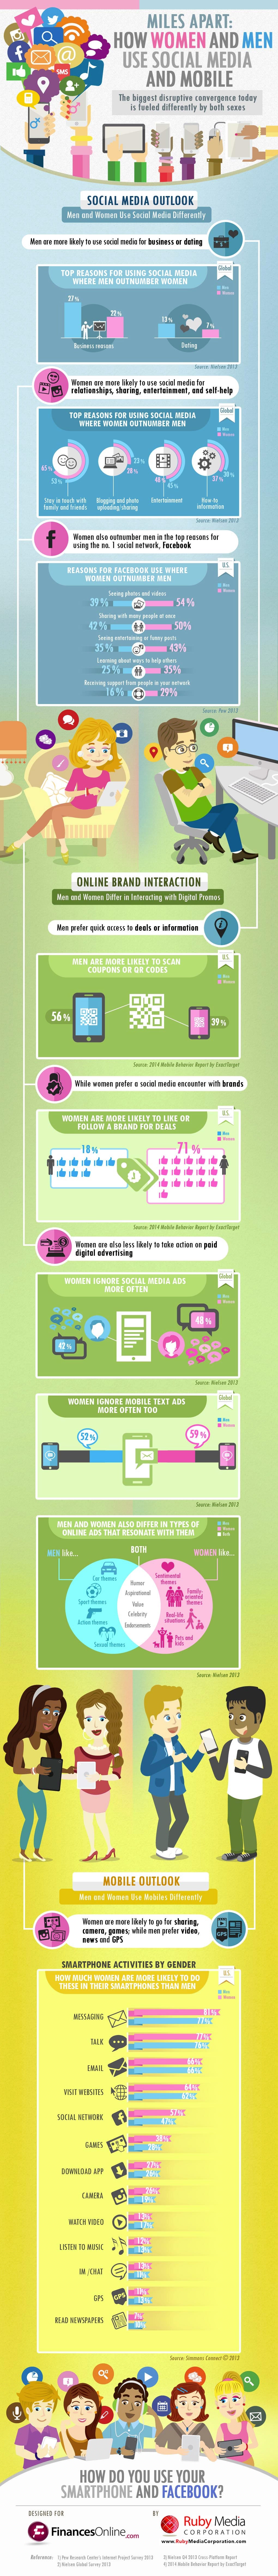 Miles apart: How women and men use social media and mobile [infographic]